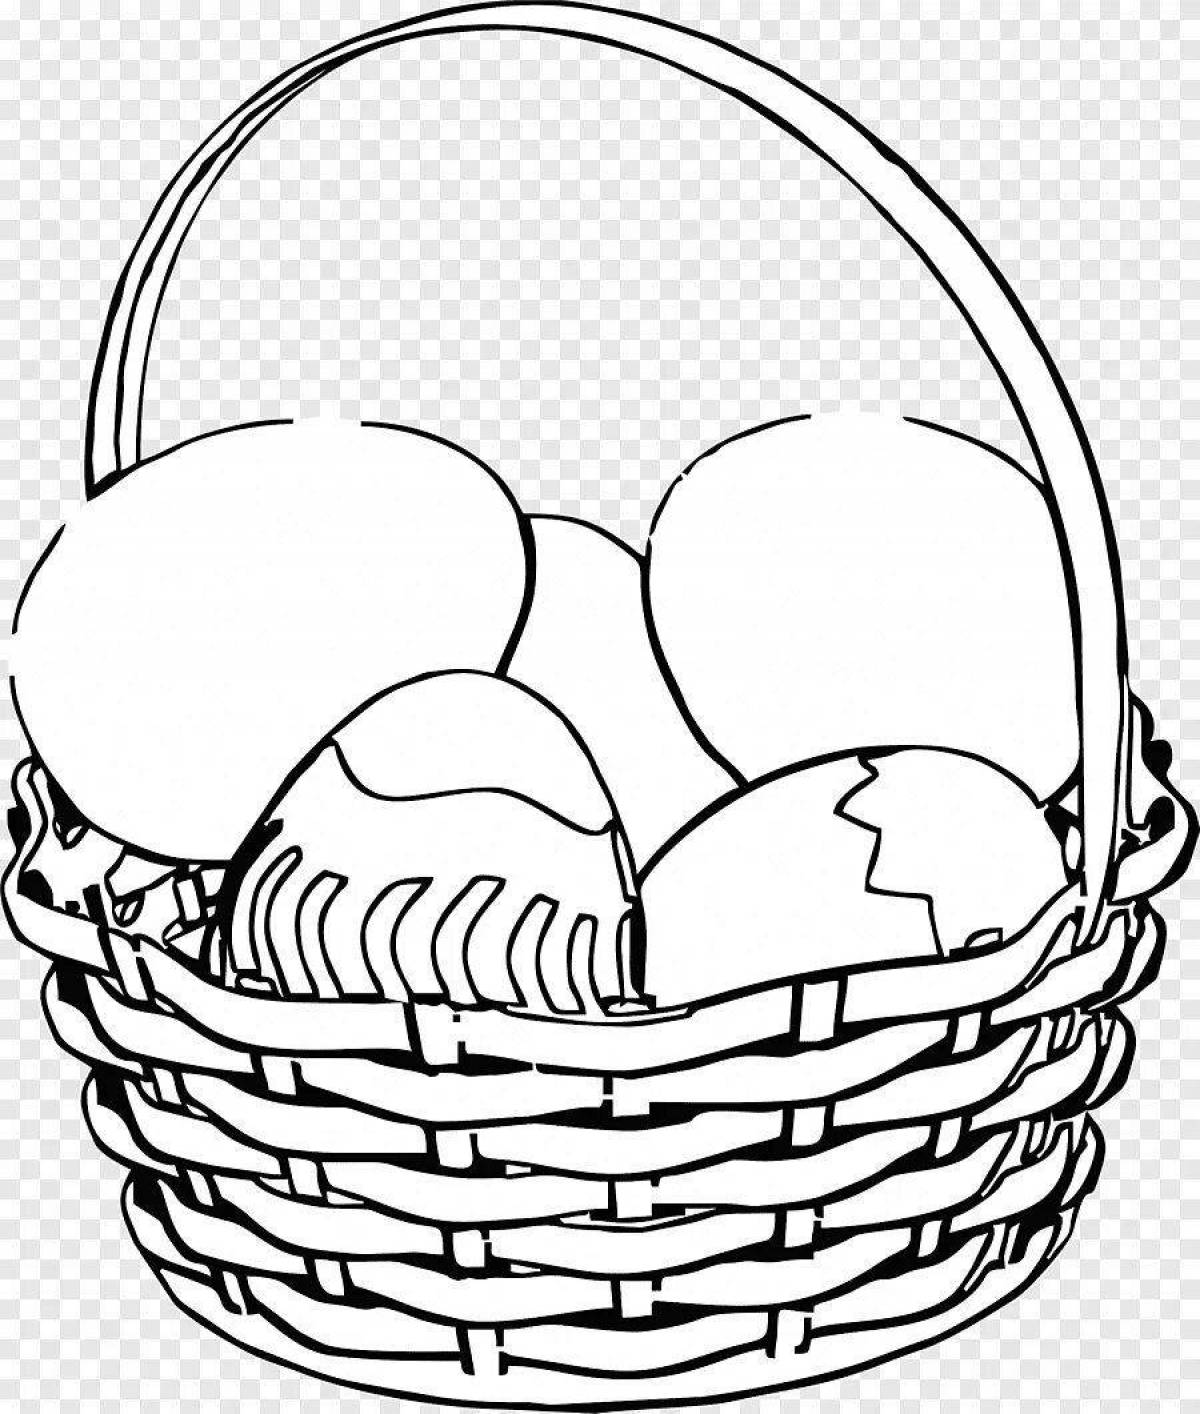 Coloring page beckoning basket with mushrooms